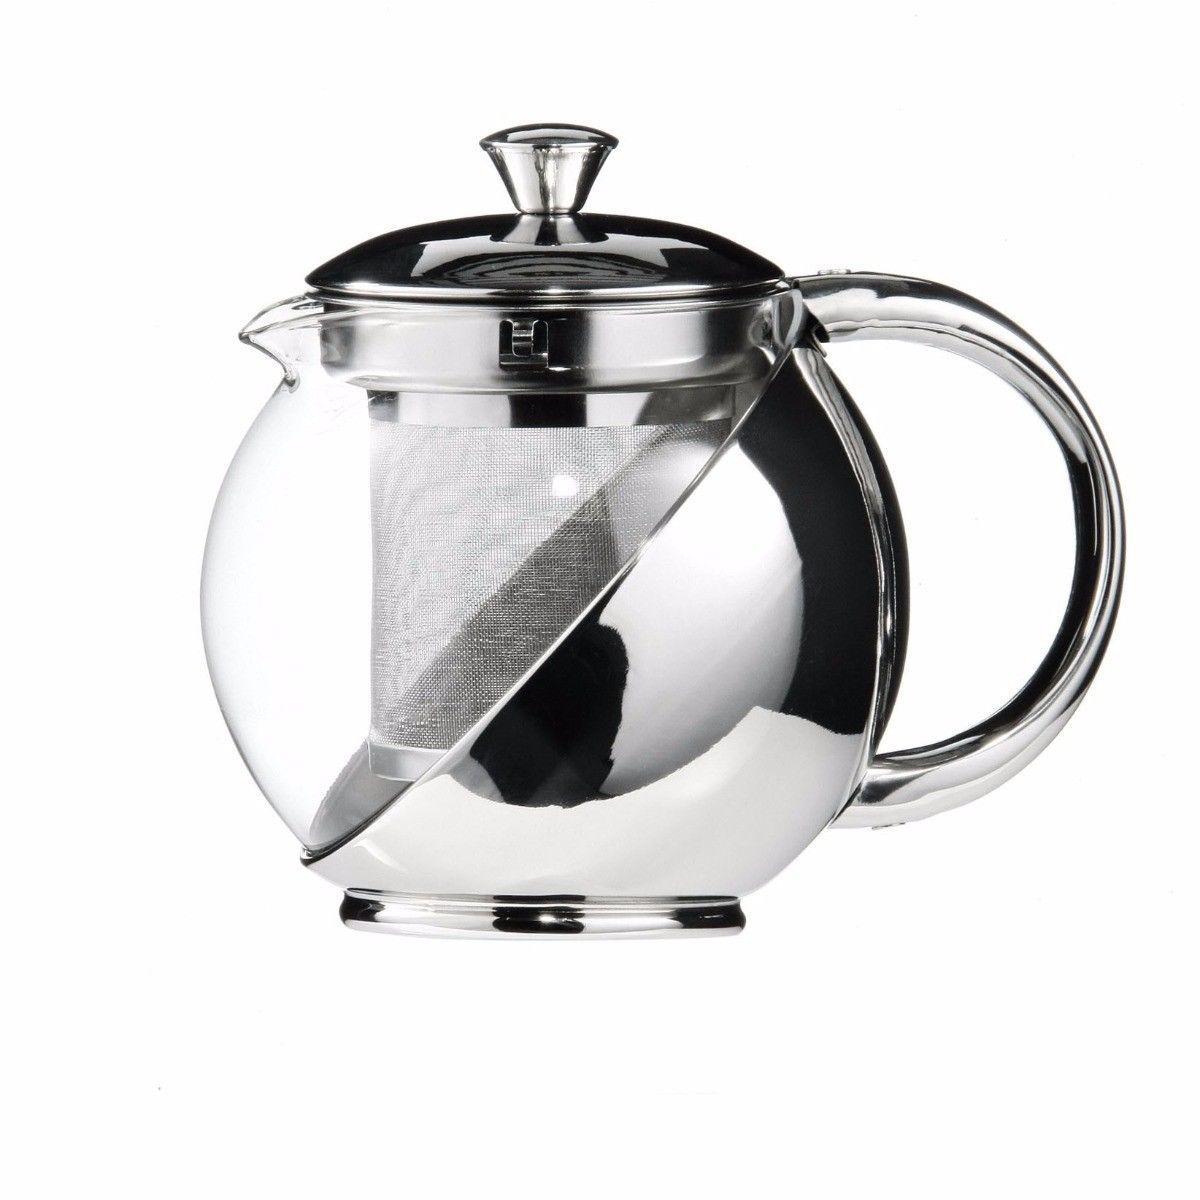 Stainless Steel and Glass Teapot with Mesh Strainer Filter 900ml 2350 (Parcel Rate)